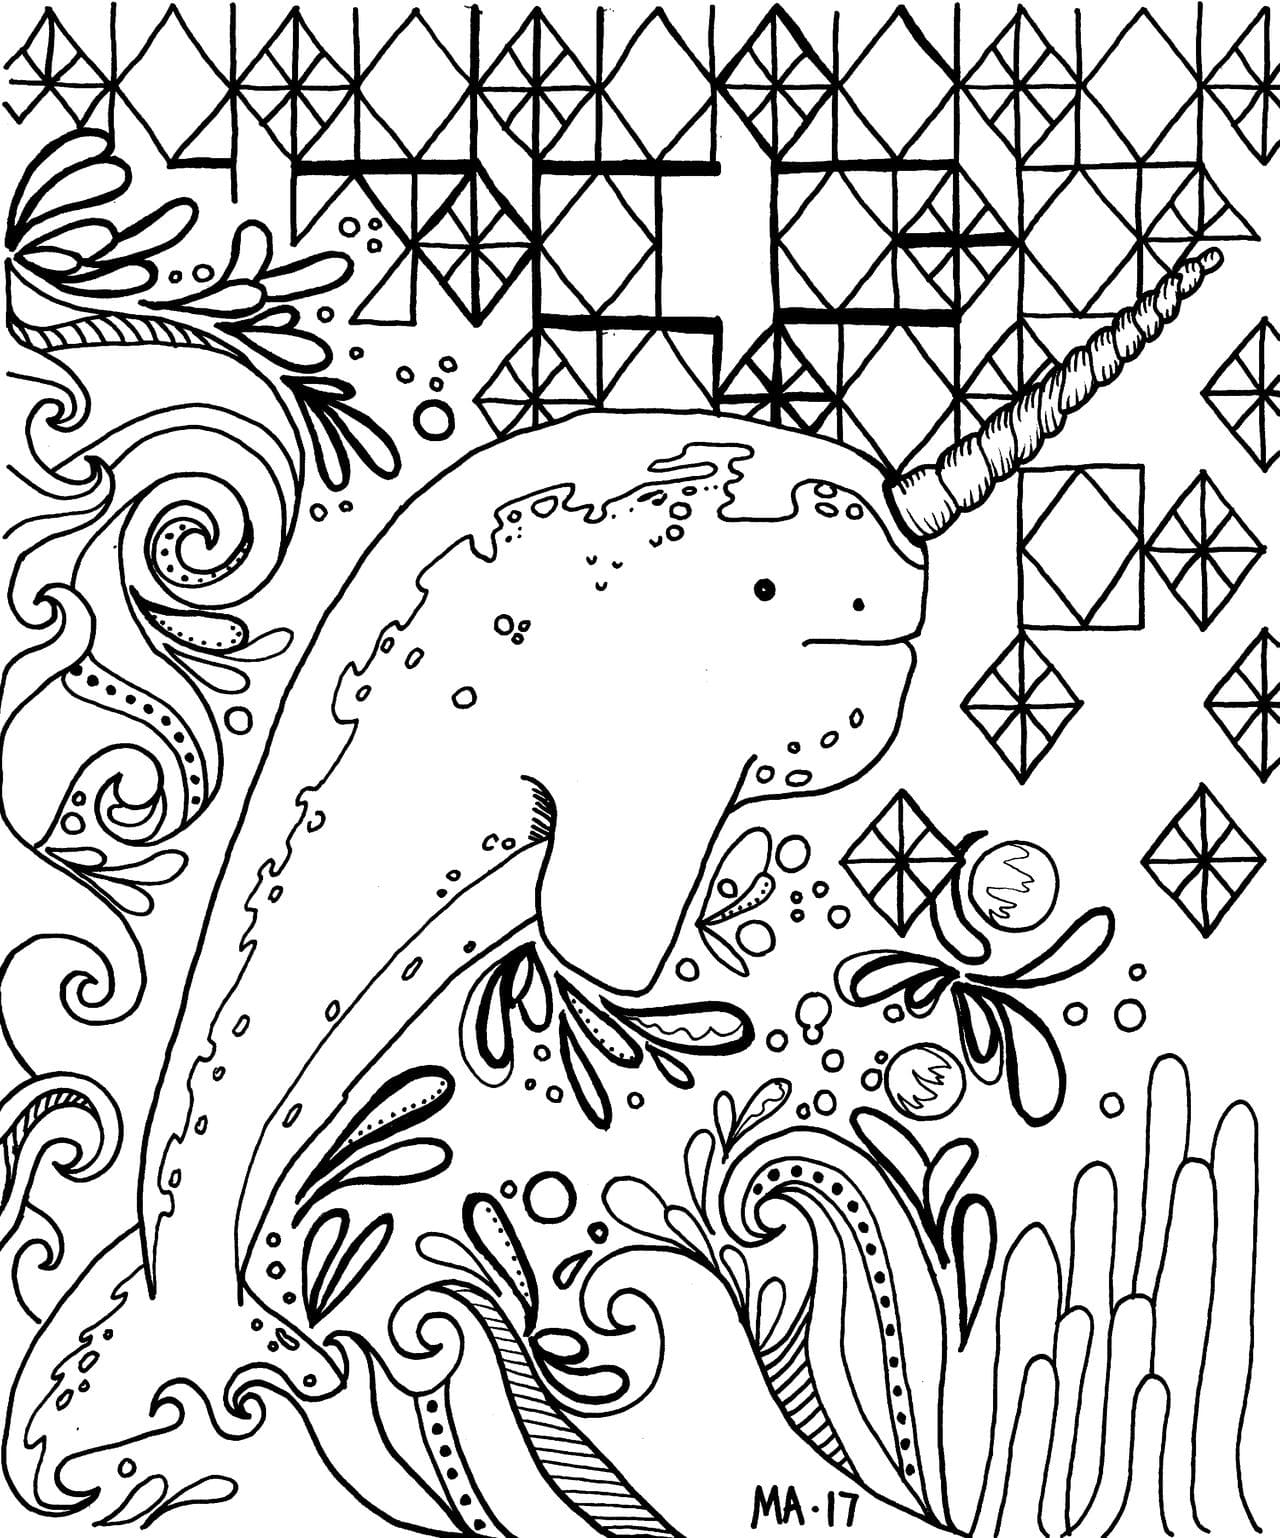 Narwhal Coloring Pages | WONDER DAY — Coloring pages for children and adults